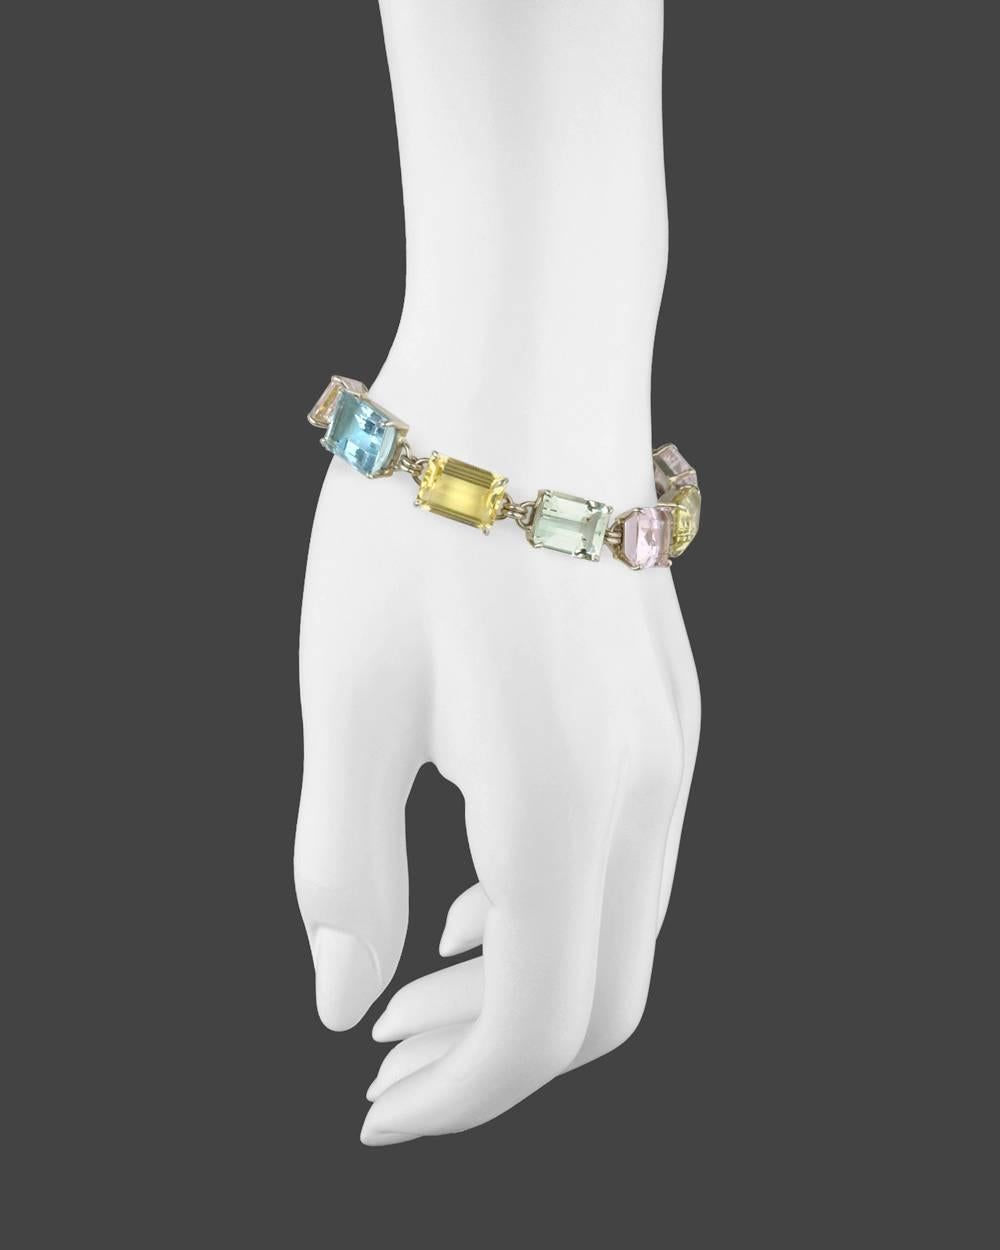 Multicolored beryl link bracelet, showcasing emerald-cut green, pink, yellow, white, and blue beryl, in 14k white gold. Just over 7.5